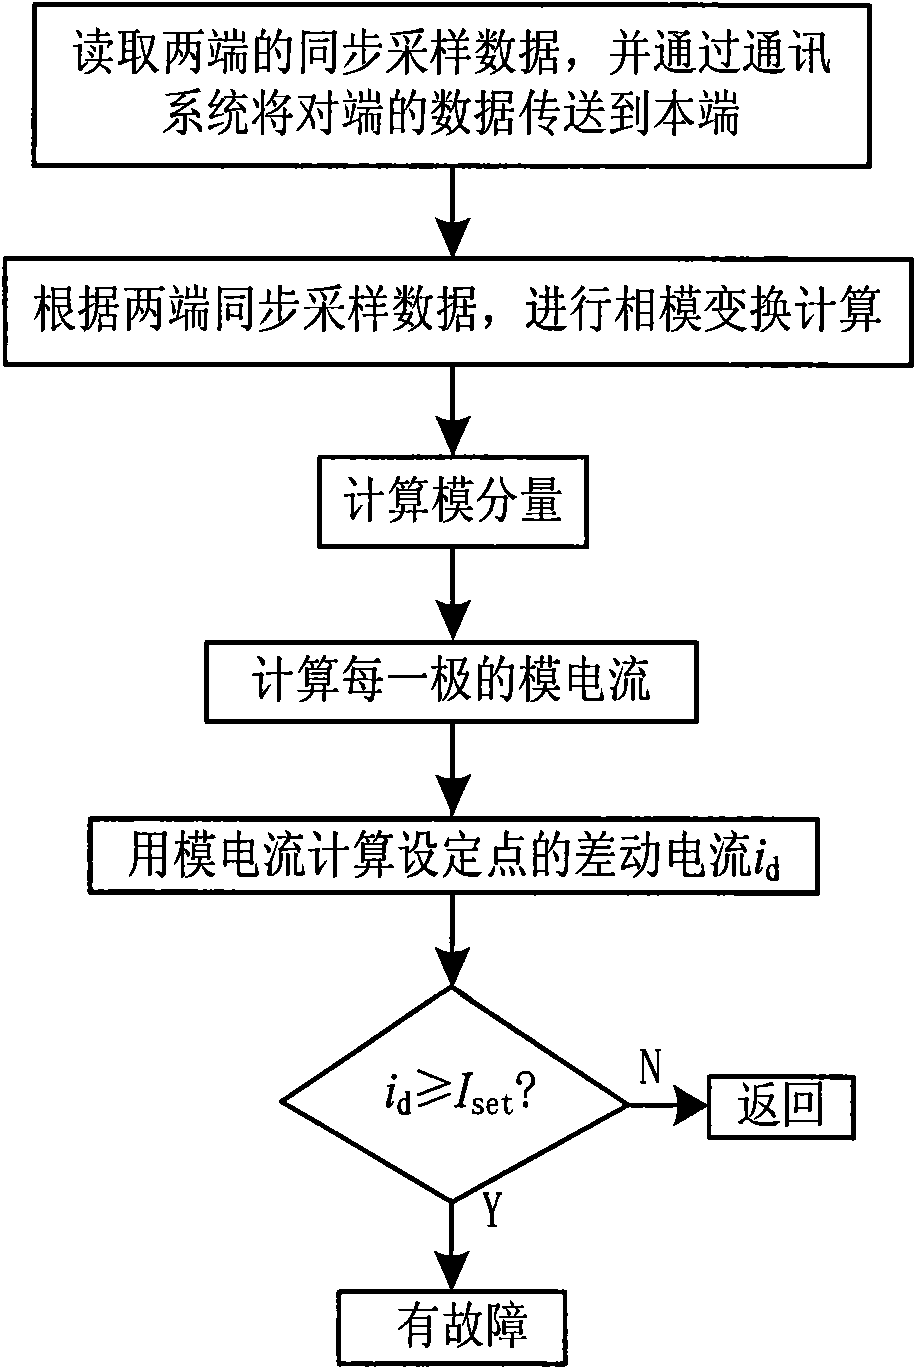 Method for current differential protection of direct current electric transmission line